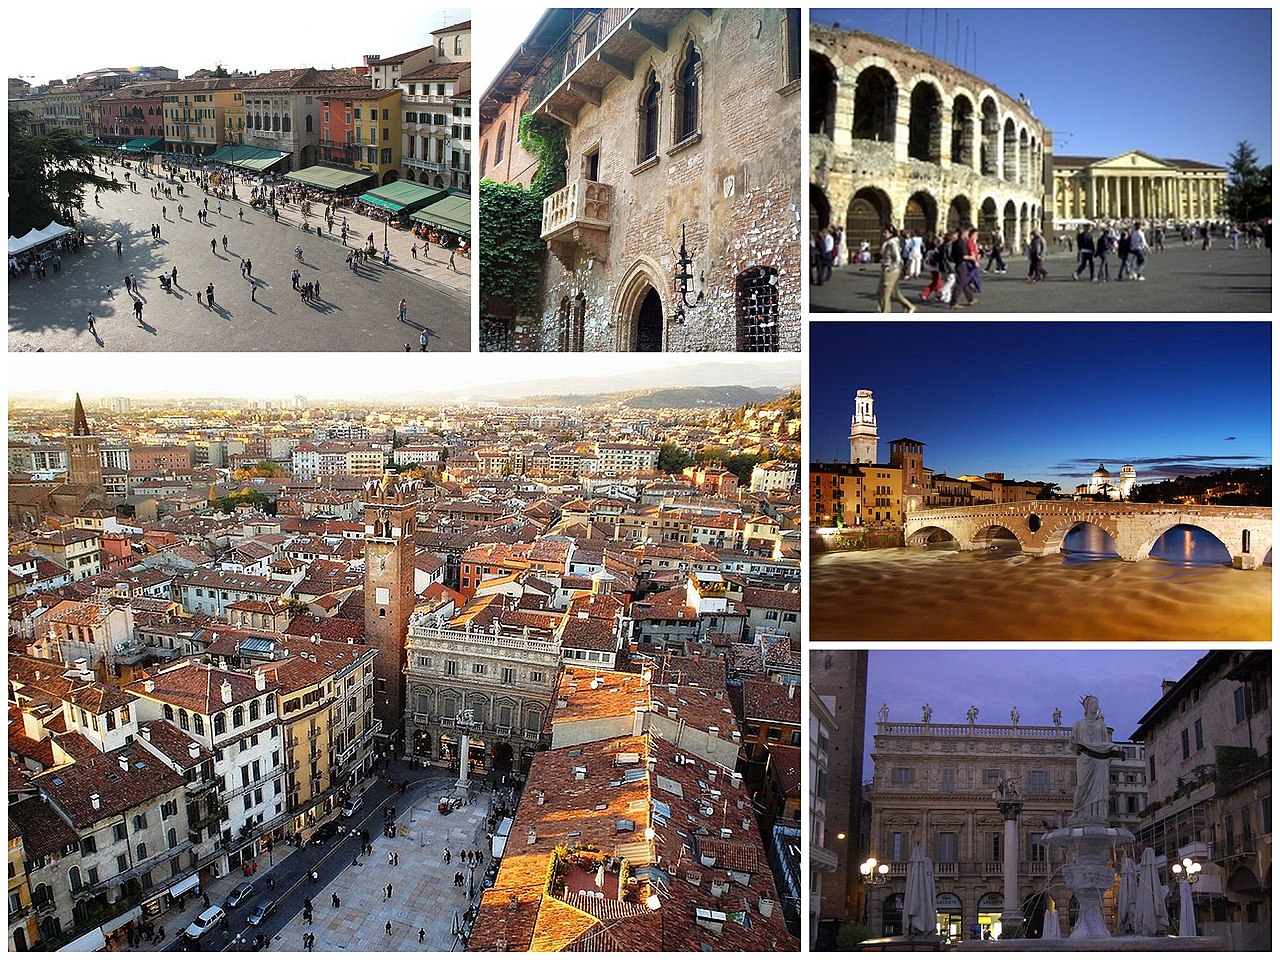 A collage of the city of Verona, Clockwise from top left to right: View of Piazza Bra from Verona Arena, House of Juliet, Verona Arena, Ponte Pietra at sunset, Statue of Madonna Verona's fountain in Piazza Erbe, View of Piazza Erbe from Lamberti Tower